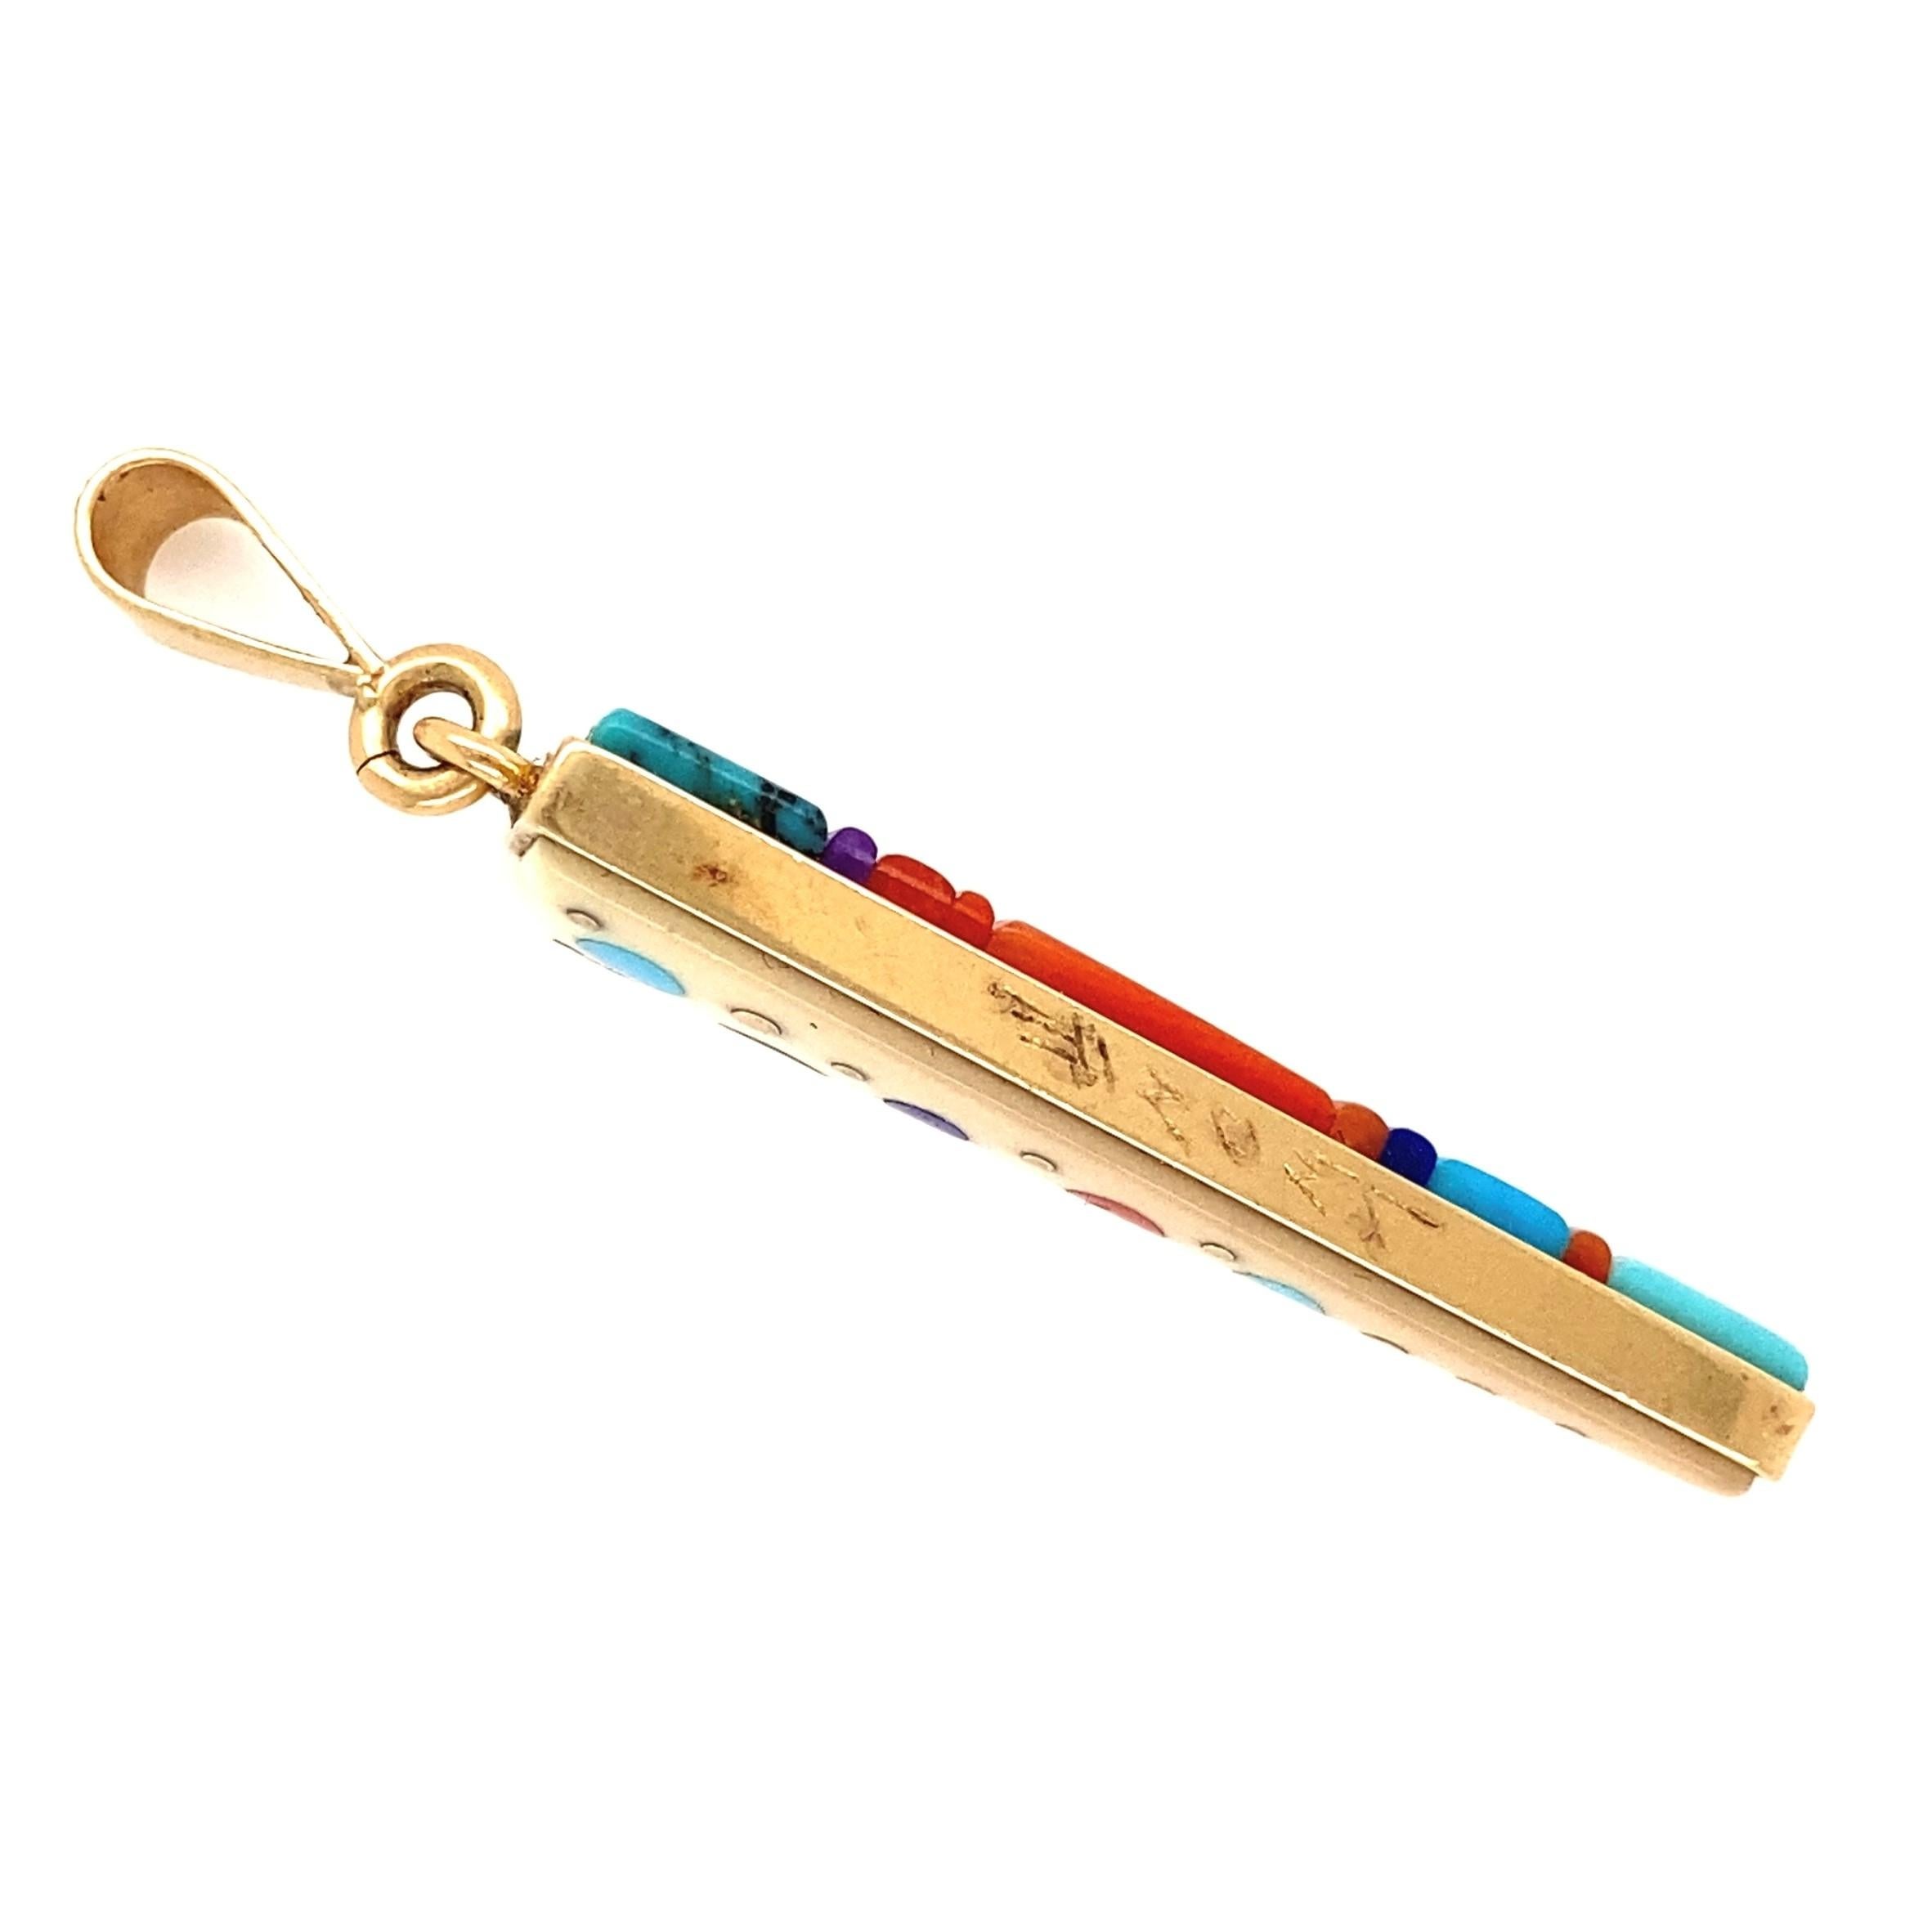 Beautiful Designer Super High Quality Double Sided Custom Inlay Gemstone 14K yellow Gold Pendant Necklace by famous artist Ervin Tsosie. Hand crafted inlay with Turquoise, Coral, Sugilite and Bone. Measuring approx.  2